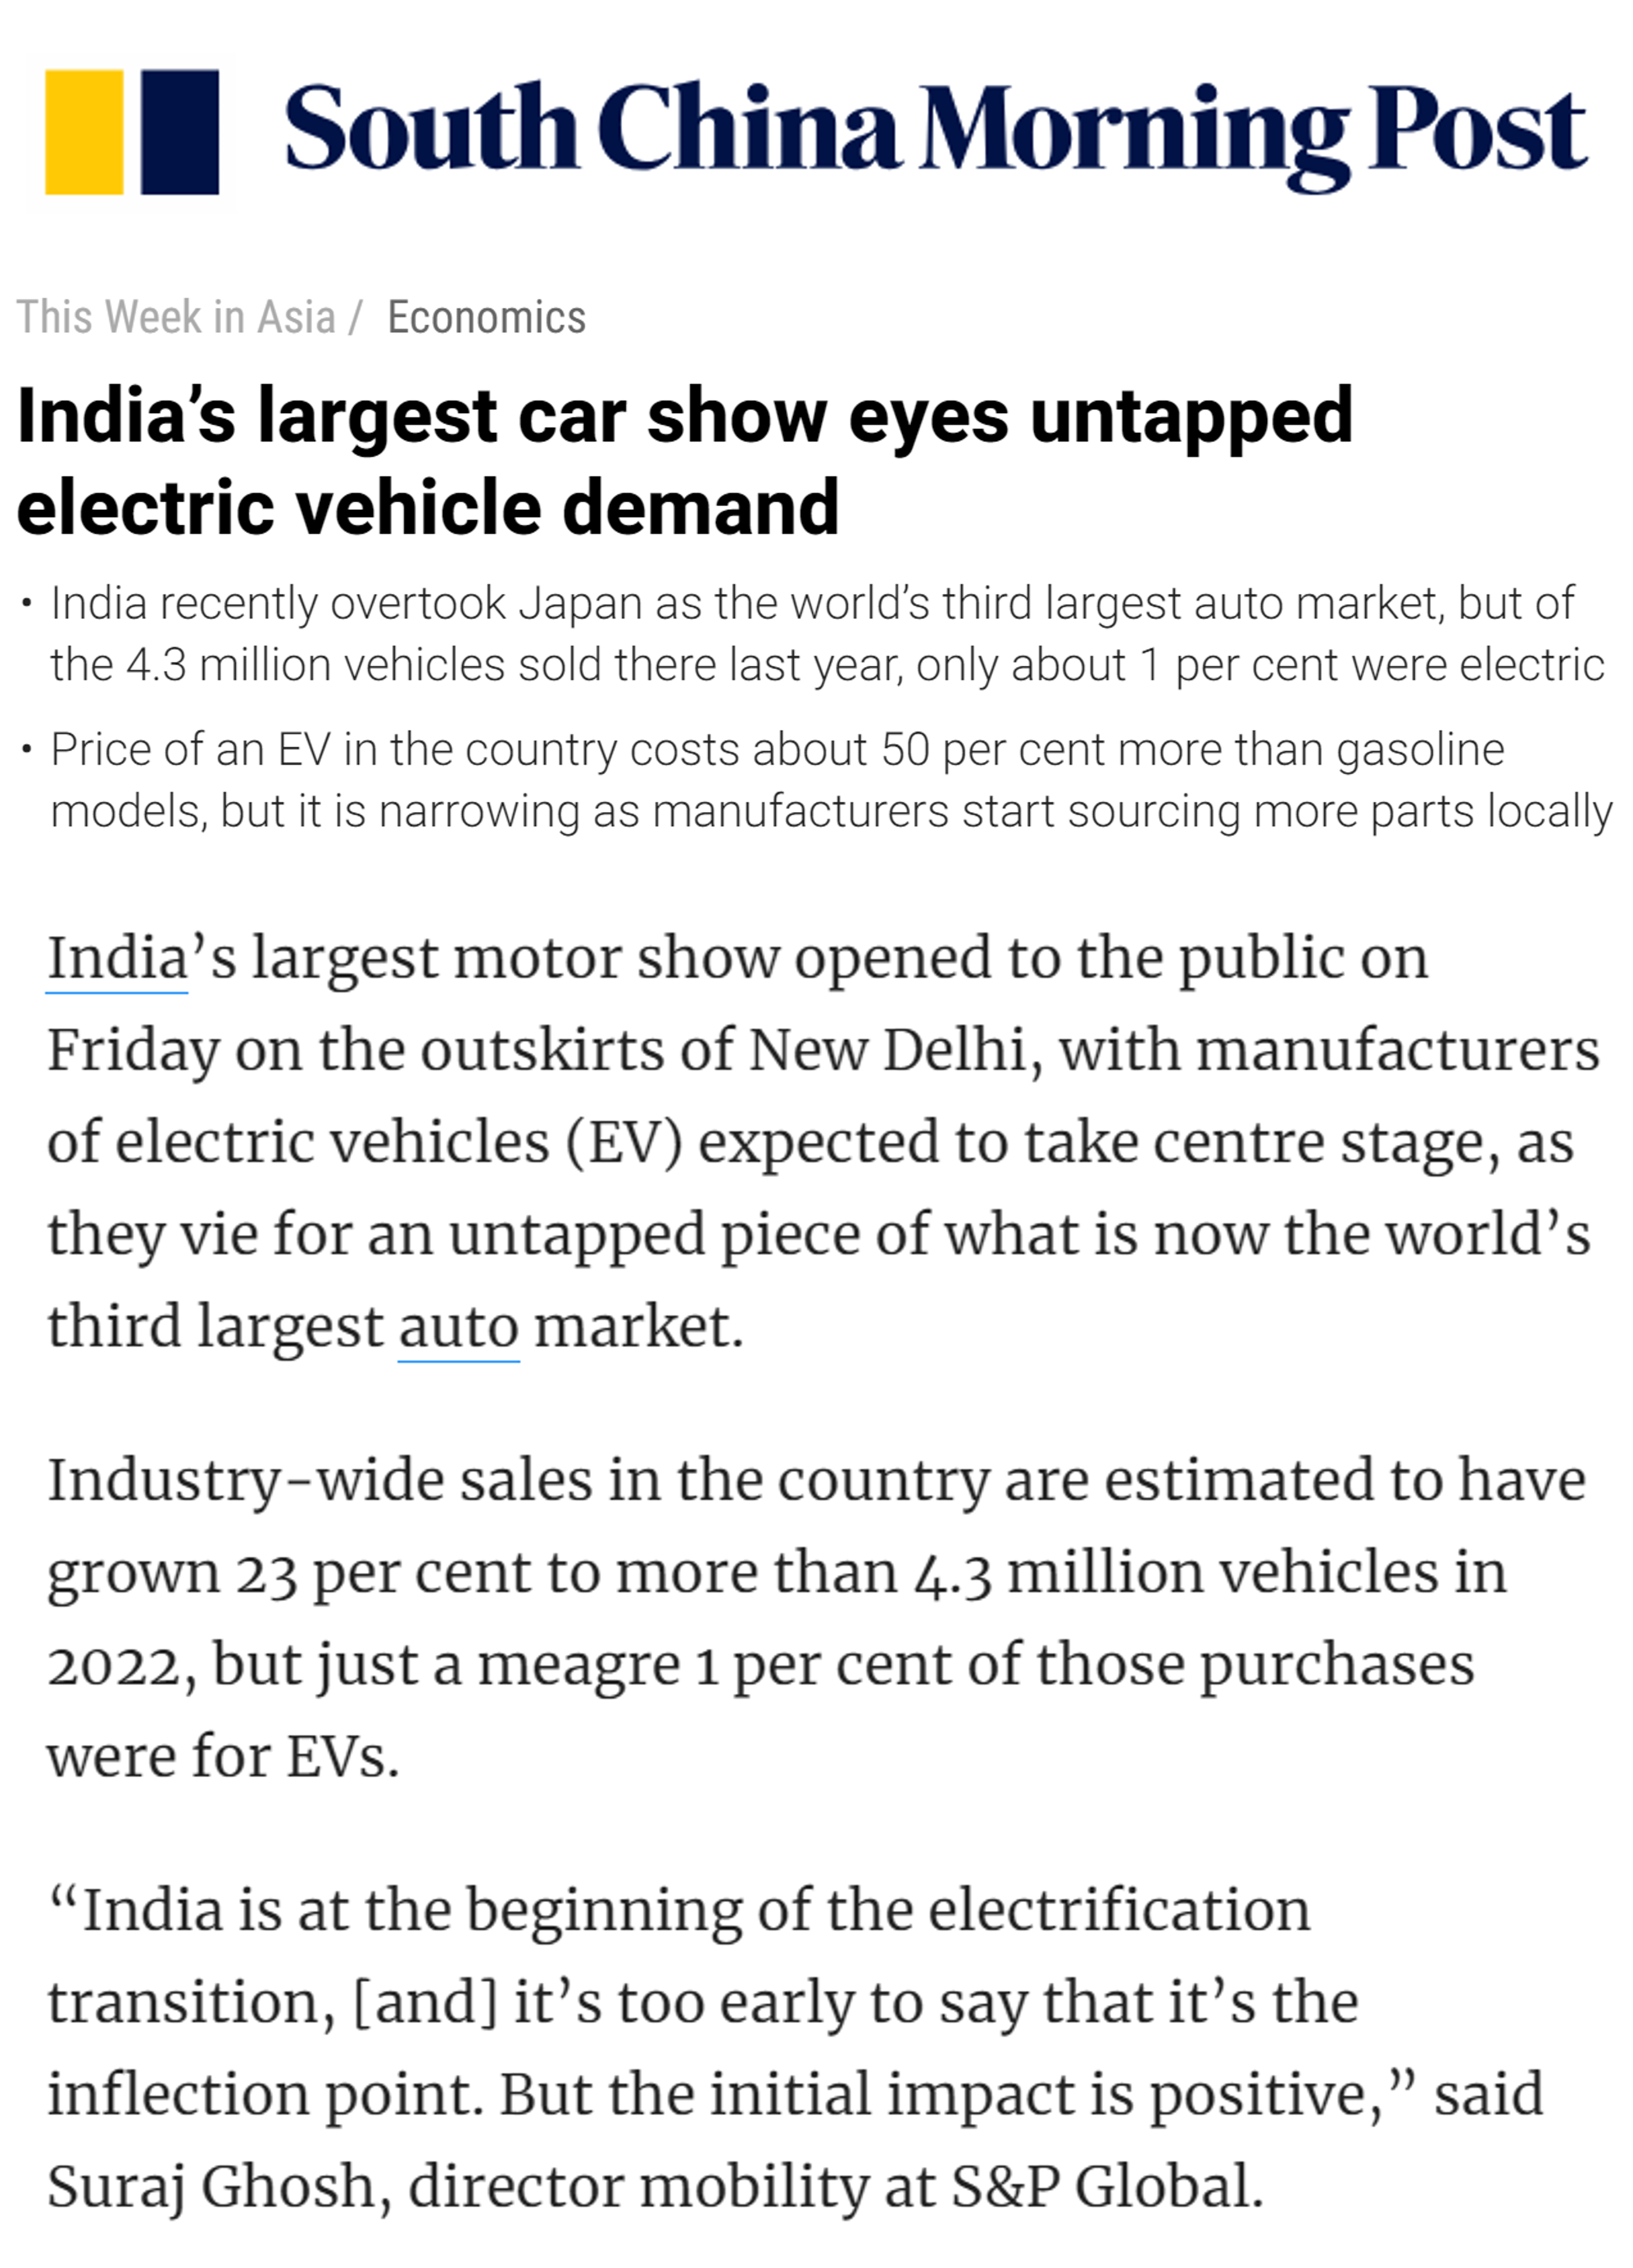 Spurthi Ravuri quoted by the South China Morning Post on the trends in EV cars sales